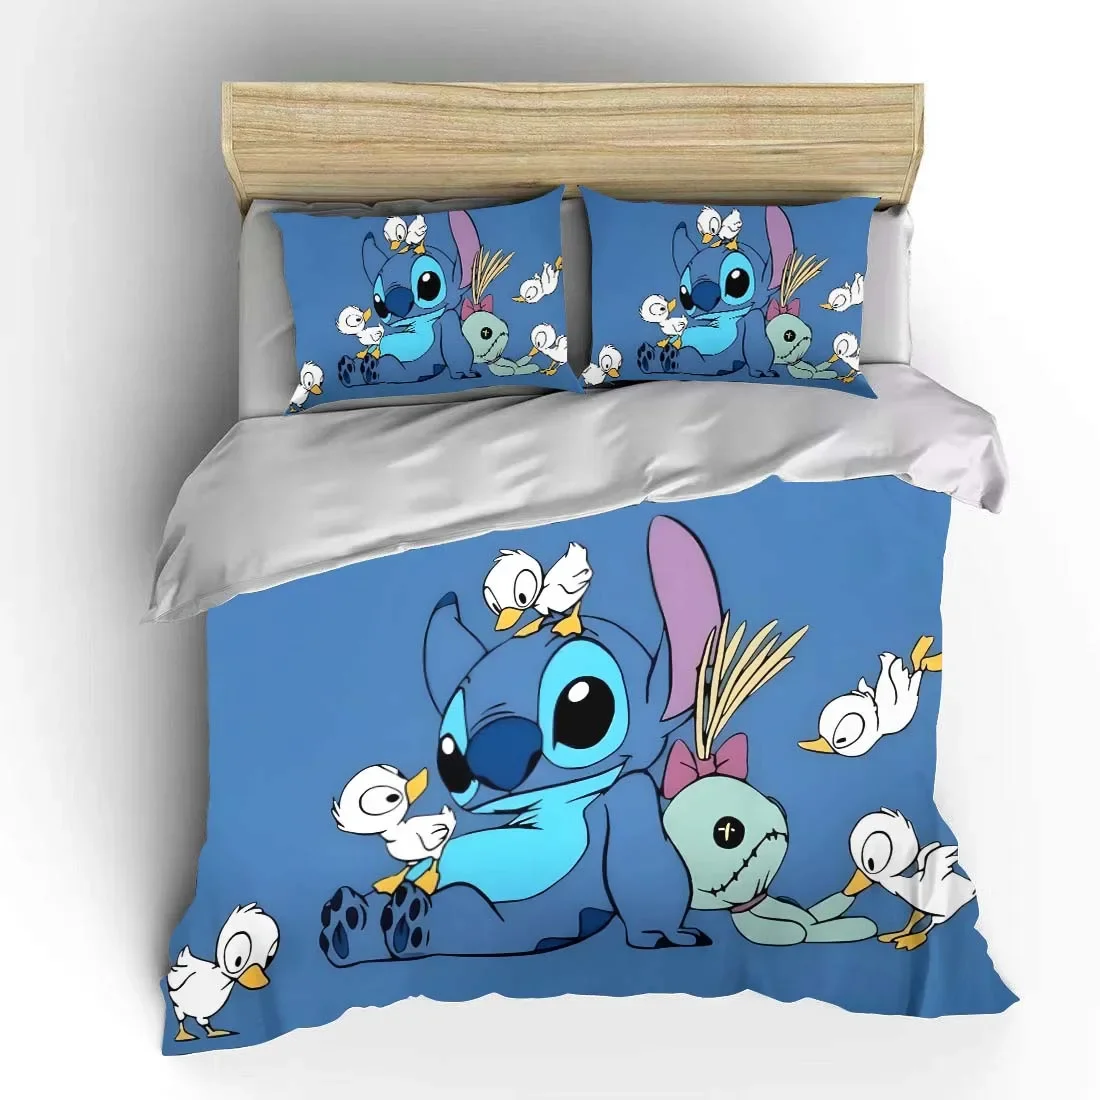 

Stitch Cartoon Bedding Set Children Disney Fashion 3 Pieces Set King Size Bed Set US Twin Adult Bed Cover Bedroom Quilt Gift